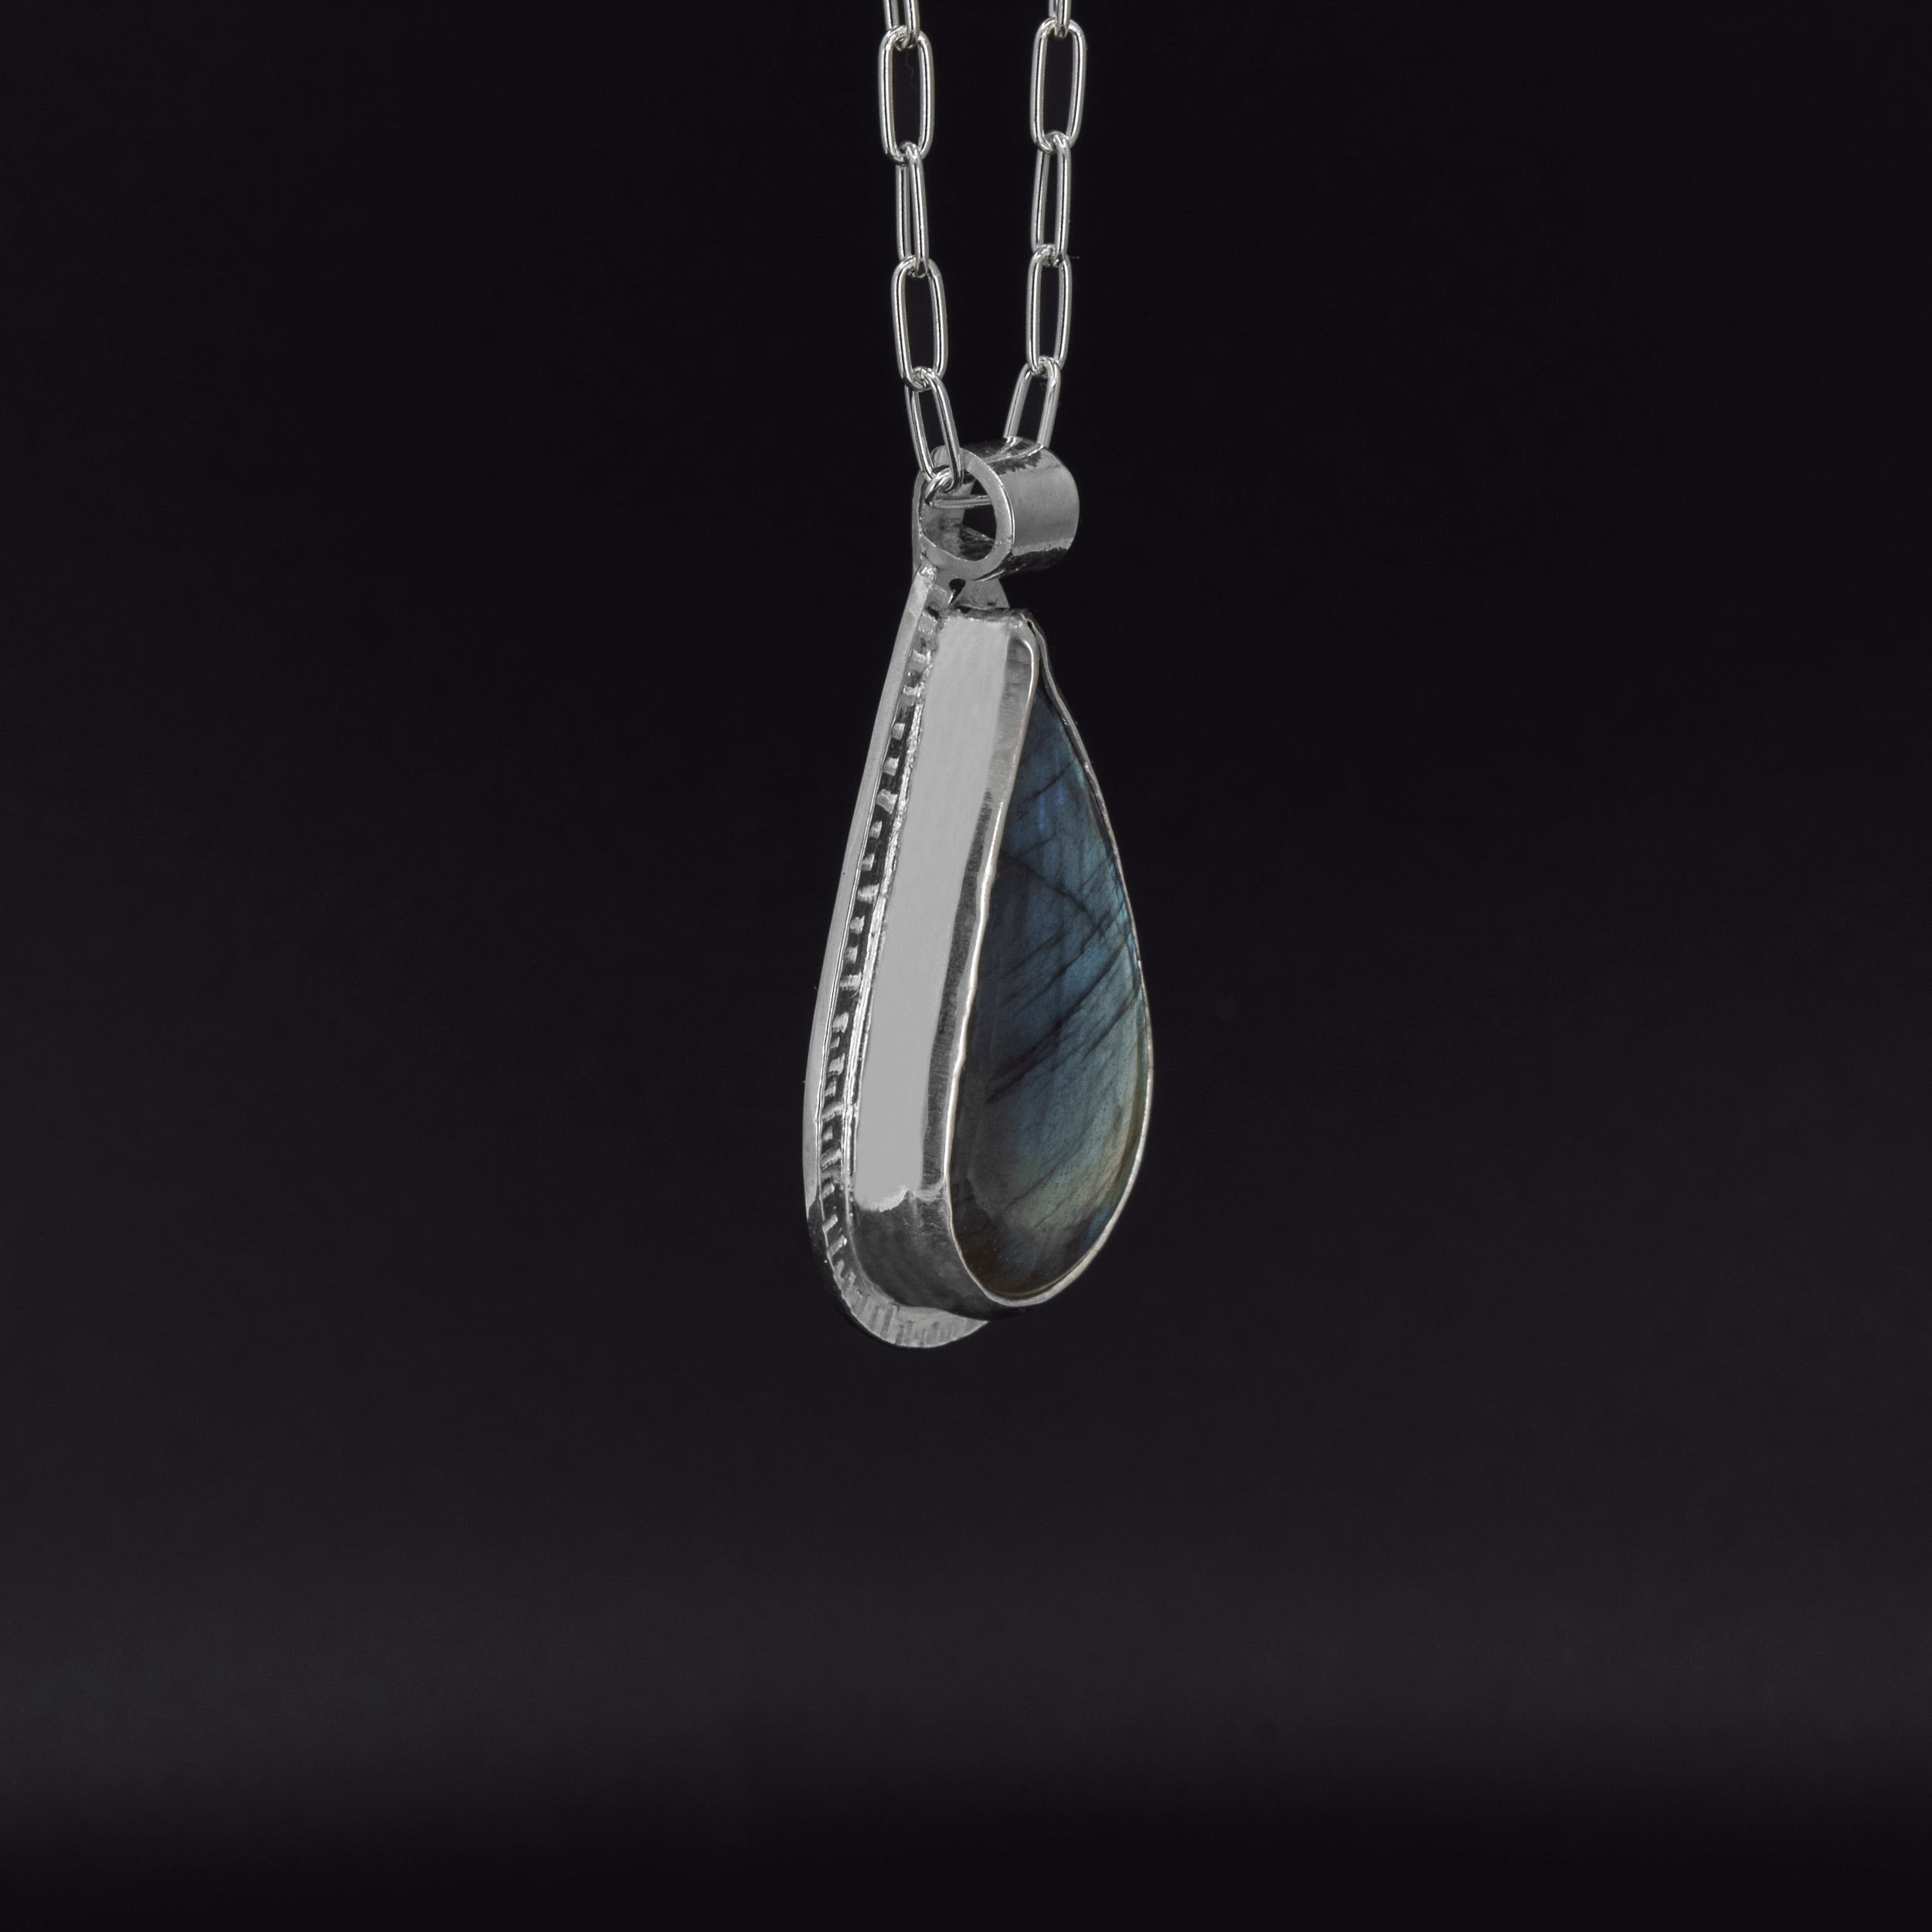 green statement pendant featuring a green labradorite stone, hanging on a paperclip style chain side view